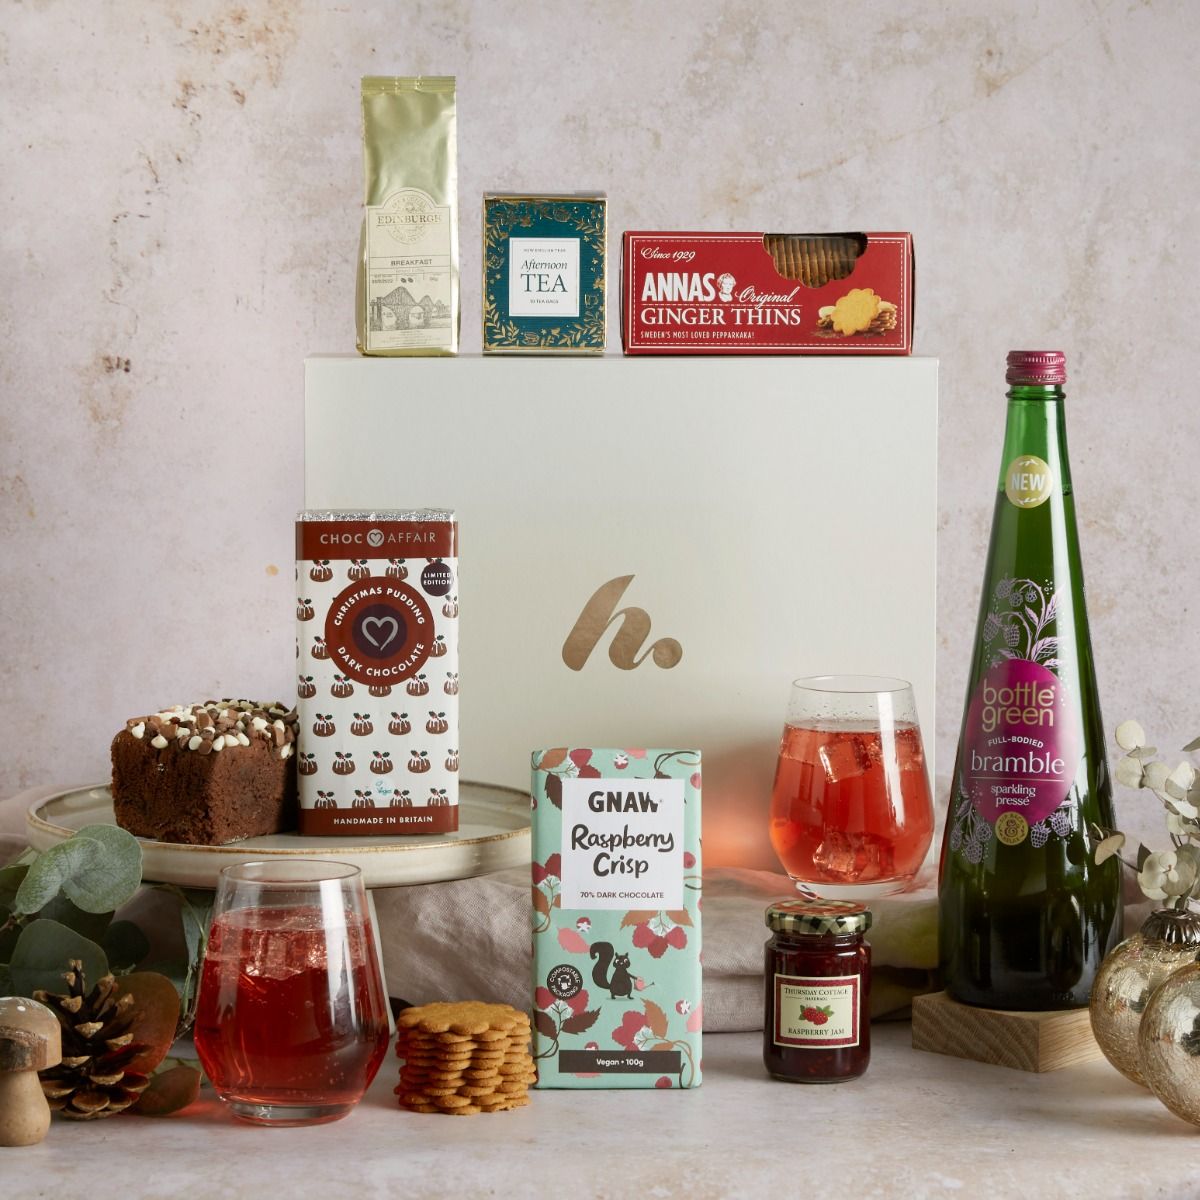 The Christmas alcohol free favourites hamper with contents on display